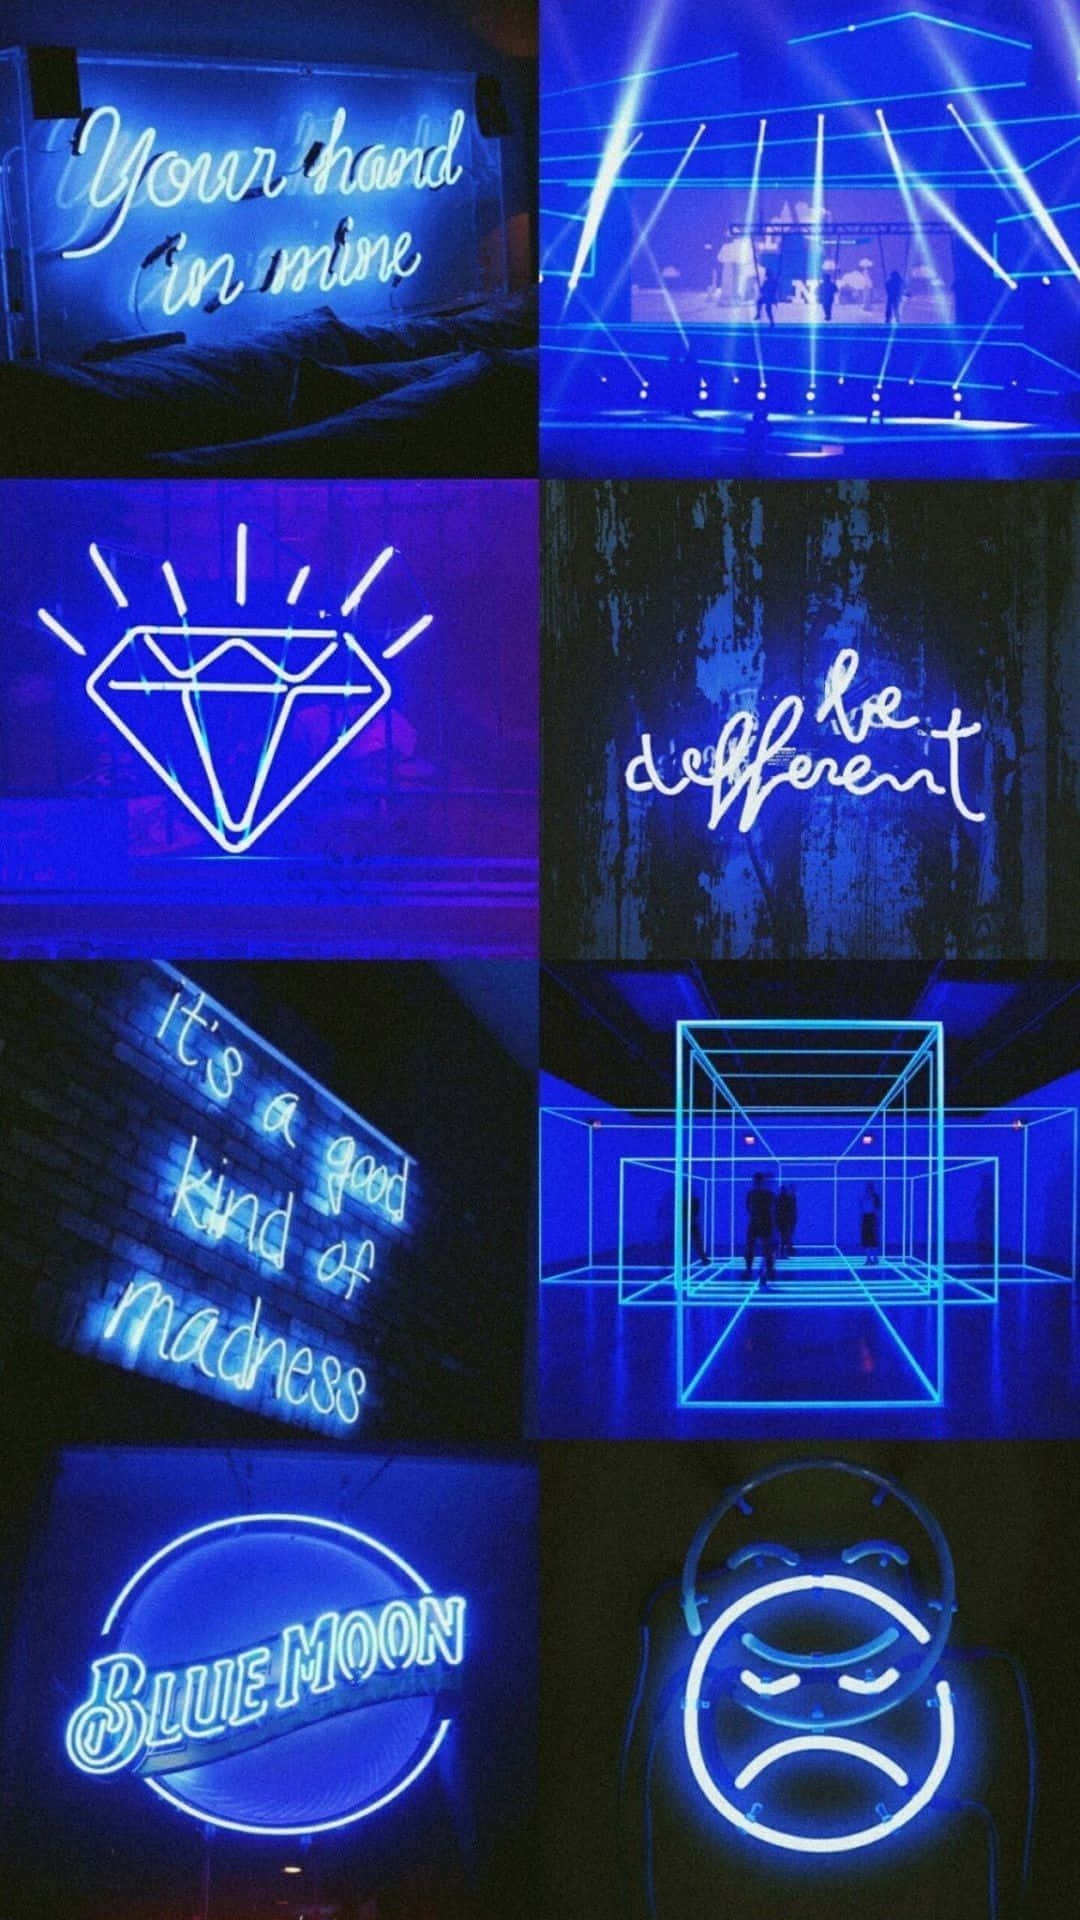 Neon Blue Aesthetic Collage Wallpaper